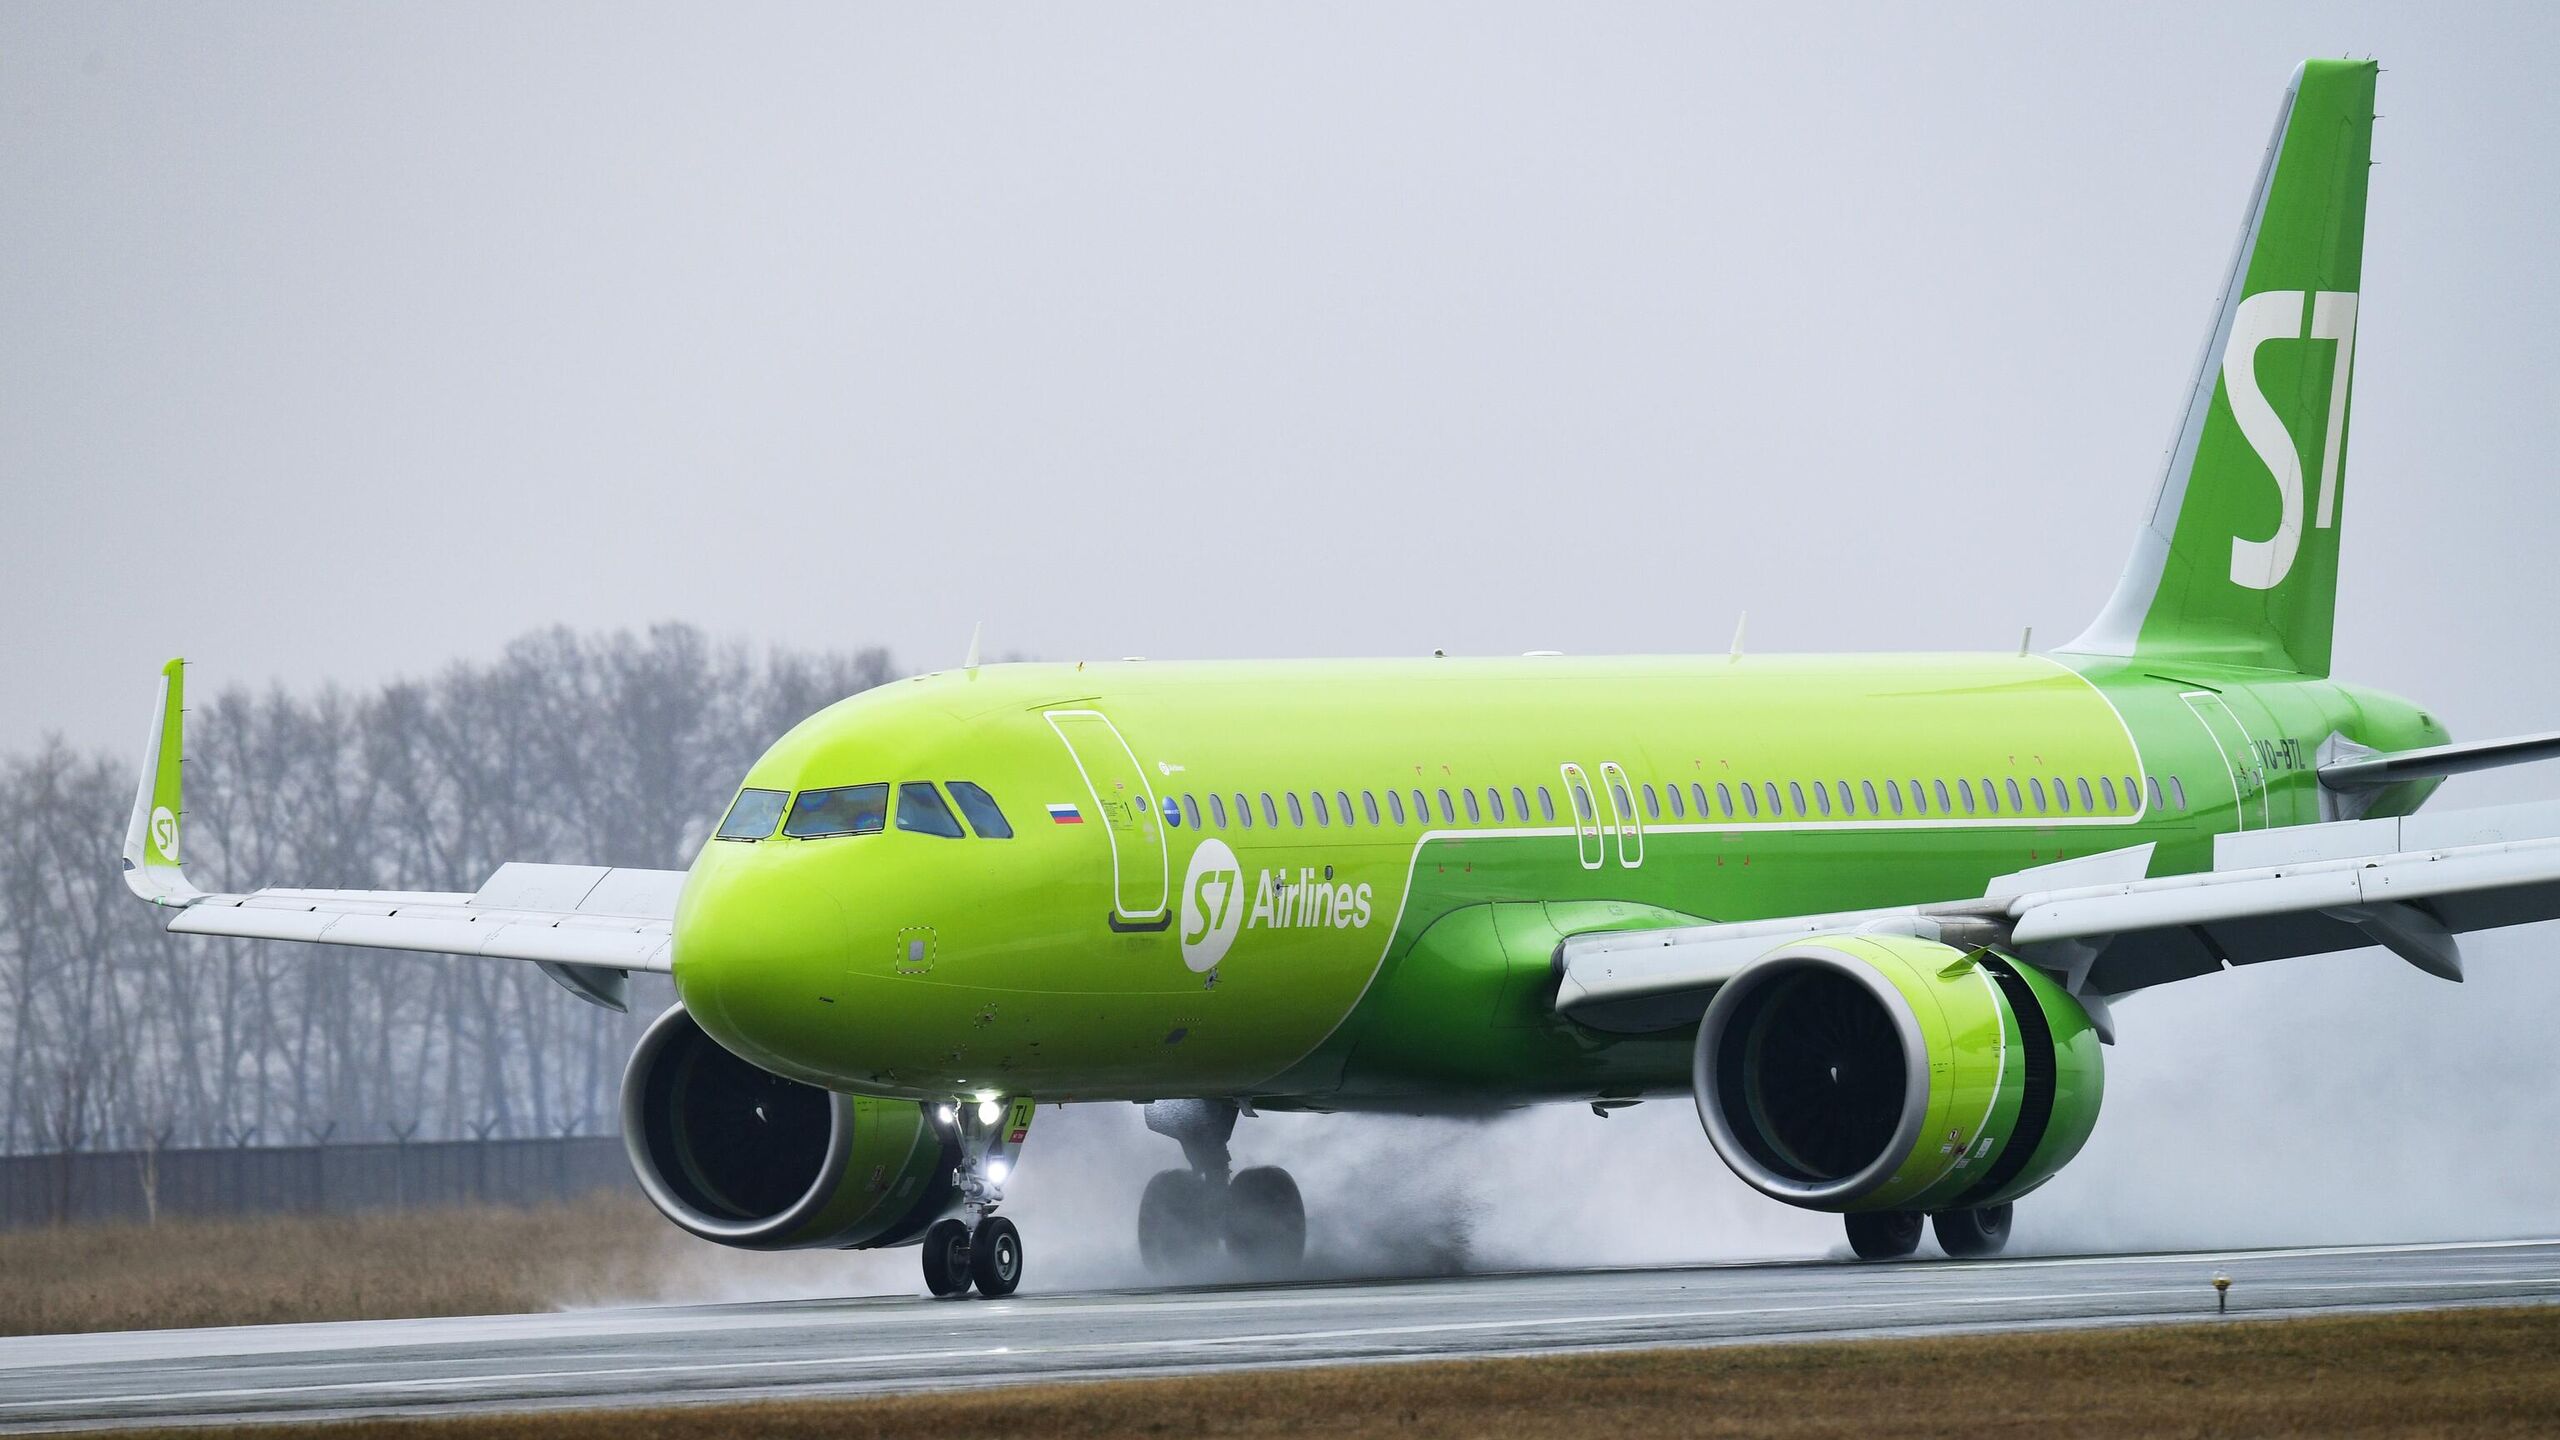 S7 airlines москва. A320 Neo s7. Самолёт s7 Airlines Airbus a320neo. A320neo. Аэробус а320 s7.